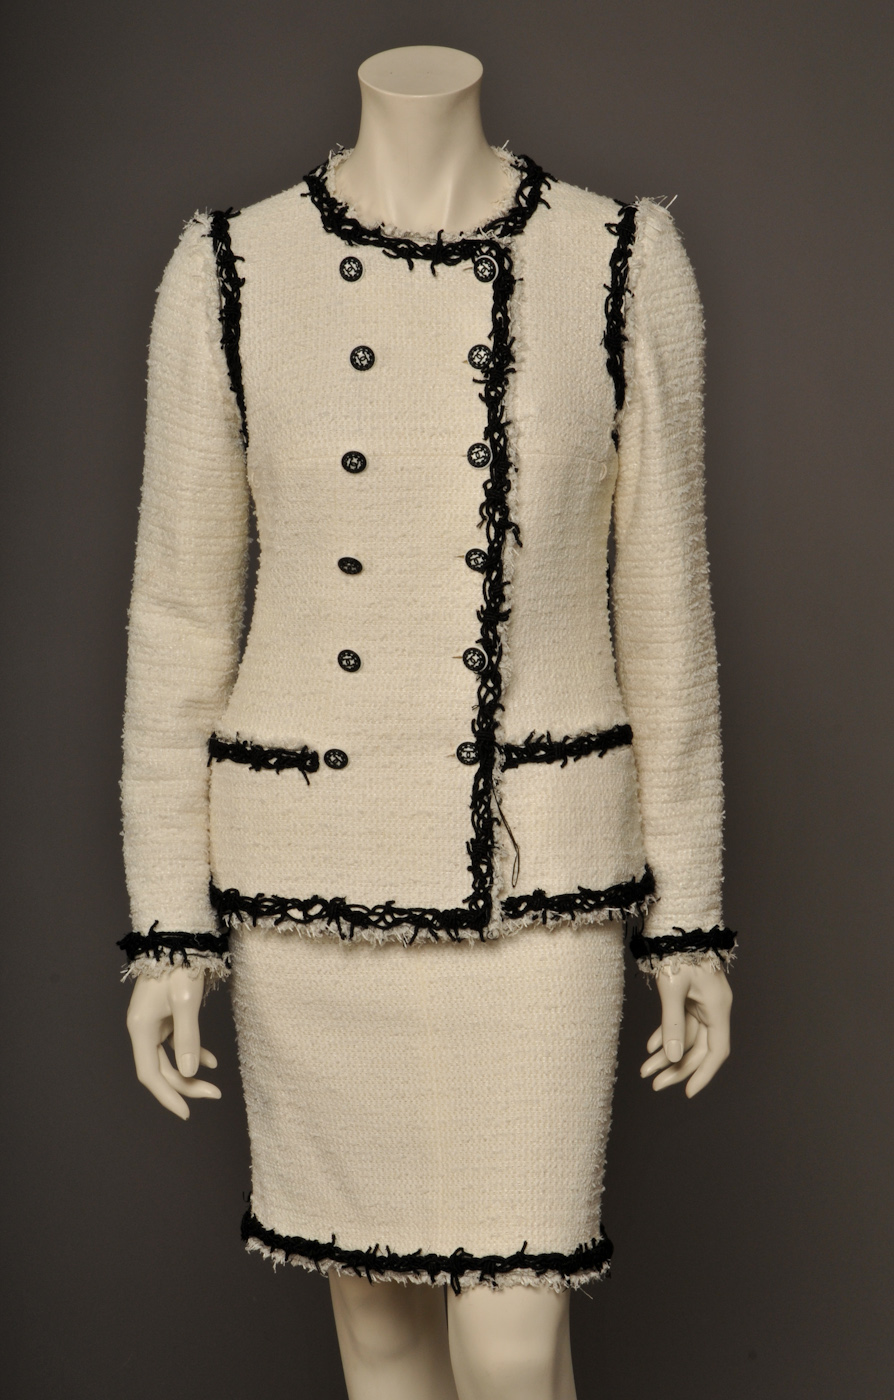 Chanel suit, black and white, size 40/38 (2) 